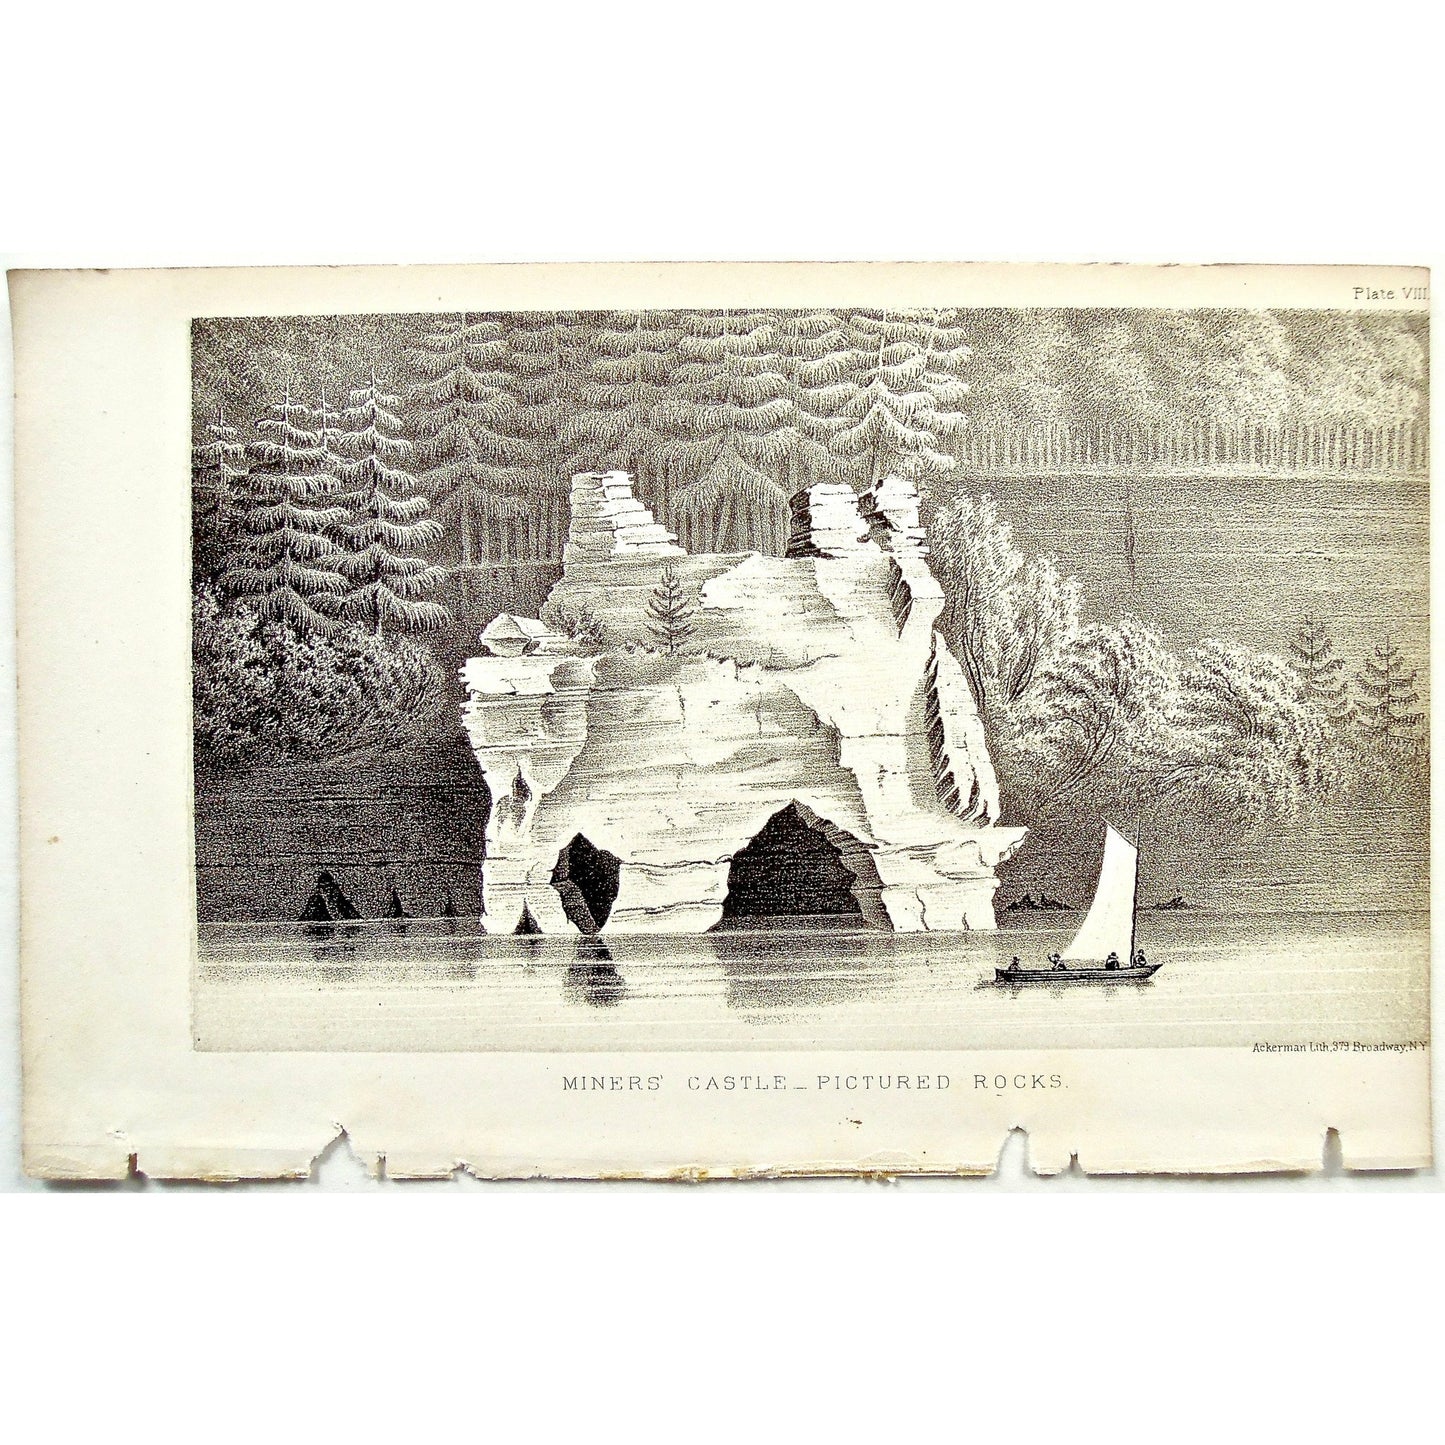 Miners' Castle, Rocks, Rock formation, Cliff, sailing, sailboat, view, from the water, Pictured rocks, Landscape, Lake Superior, Lake, Superior, National Lakeshore, Lakeshore, Michigan, MI, Ackerman, 379 Broadway, Foster, Whitney, House of Representatives, House of Reps., Report, Geology, Topography, Land District, State of Michigan, Part II, The Iron Region, General Geology, Washington D.C., Washington, DC, D.C., 1851, lithograph, two-toned, Antique Print, Antique, Prints, Vintage, Art, Wall art, Decor, wa